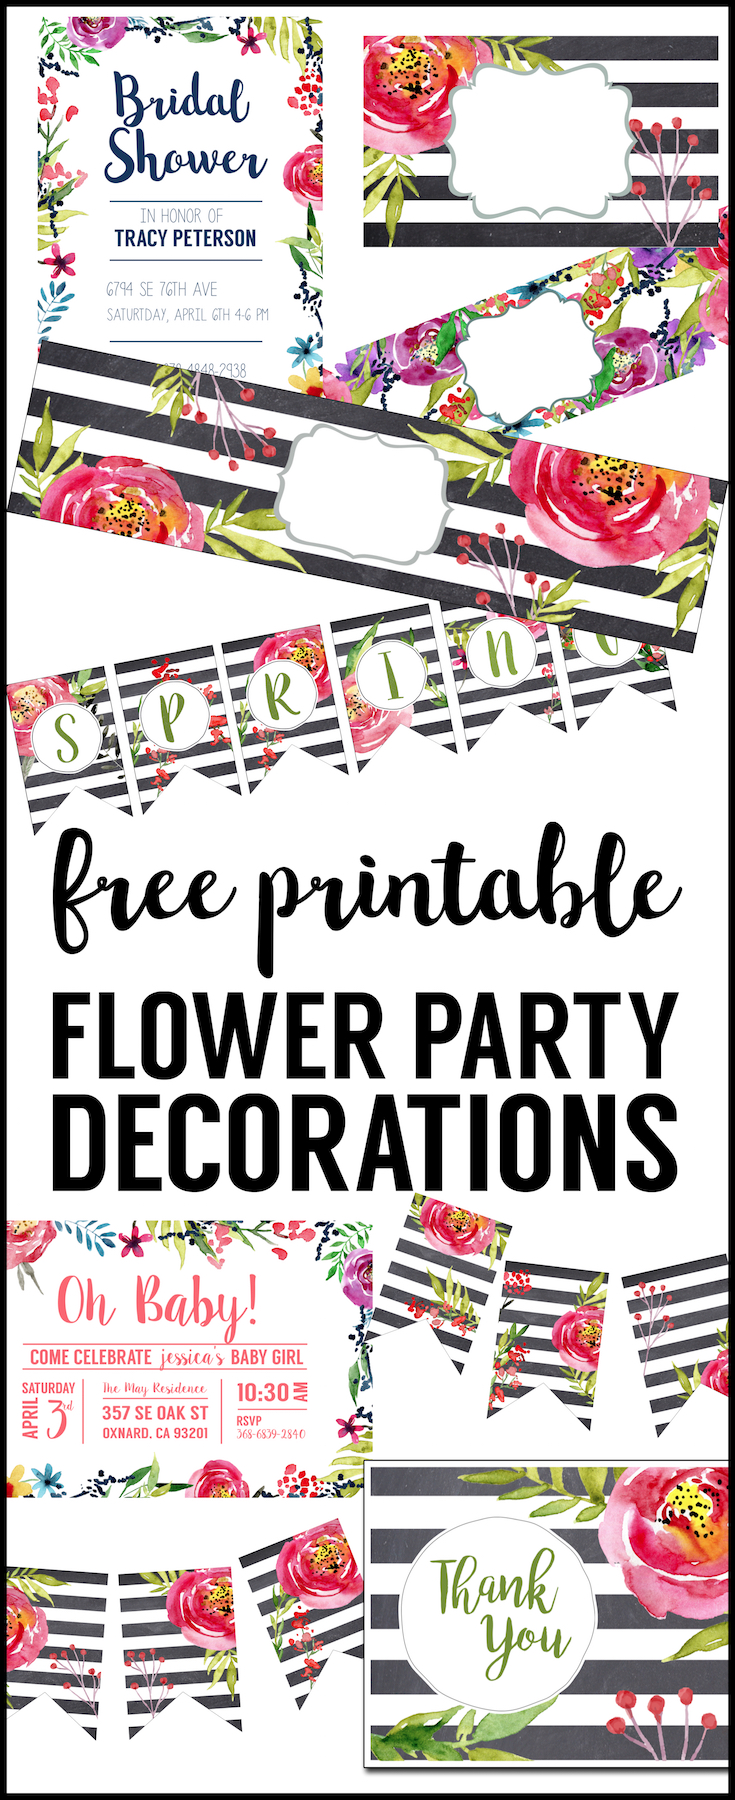  Flower Party Printables, Free Printable Decorations. Print this complete DIY decorations set for a floral baby shower, birthday party, bridal shower, wedding, spring garden party, or Easter brunch. 